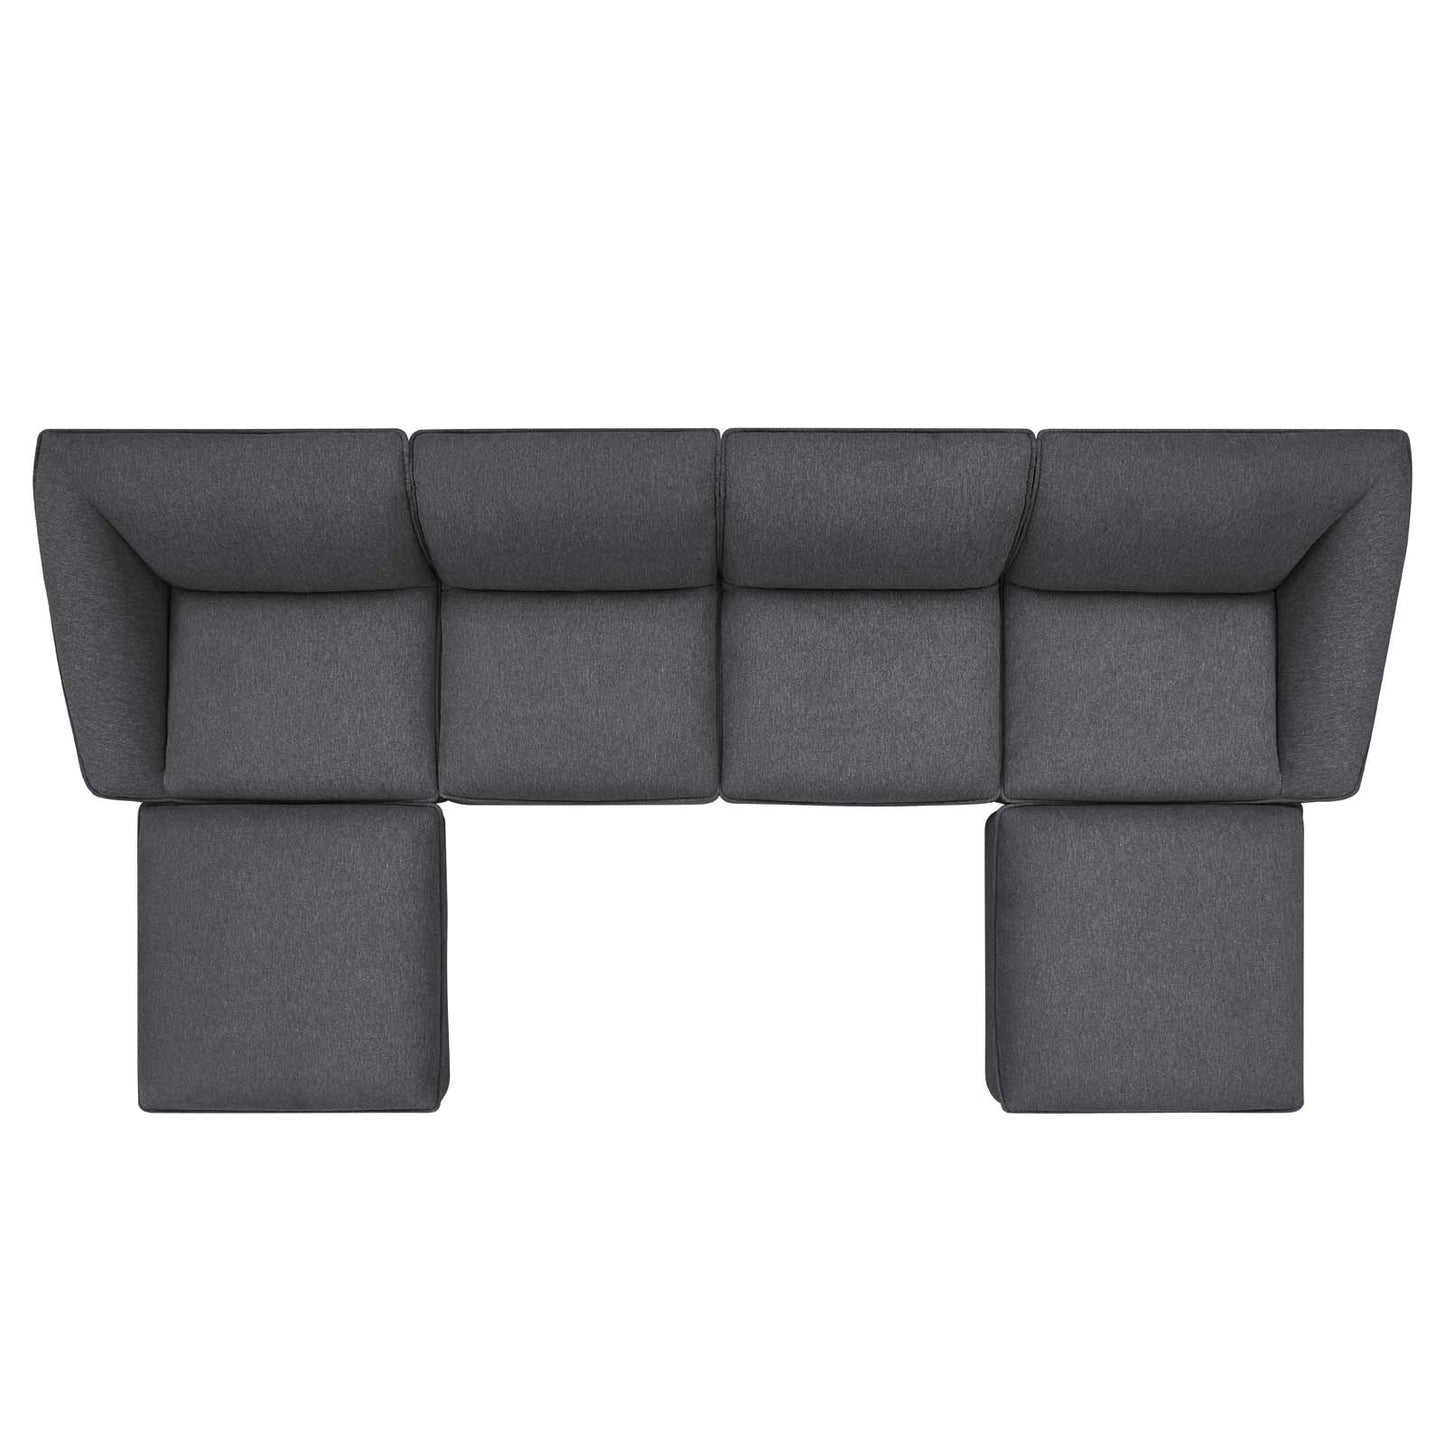 Comprise 6-Piece Living Room Set Charcoal EEI-5409-CHA